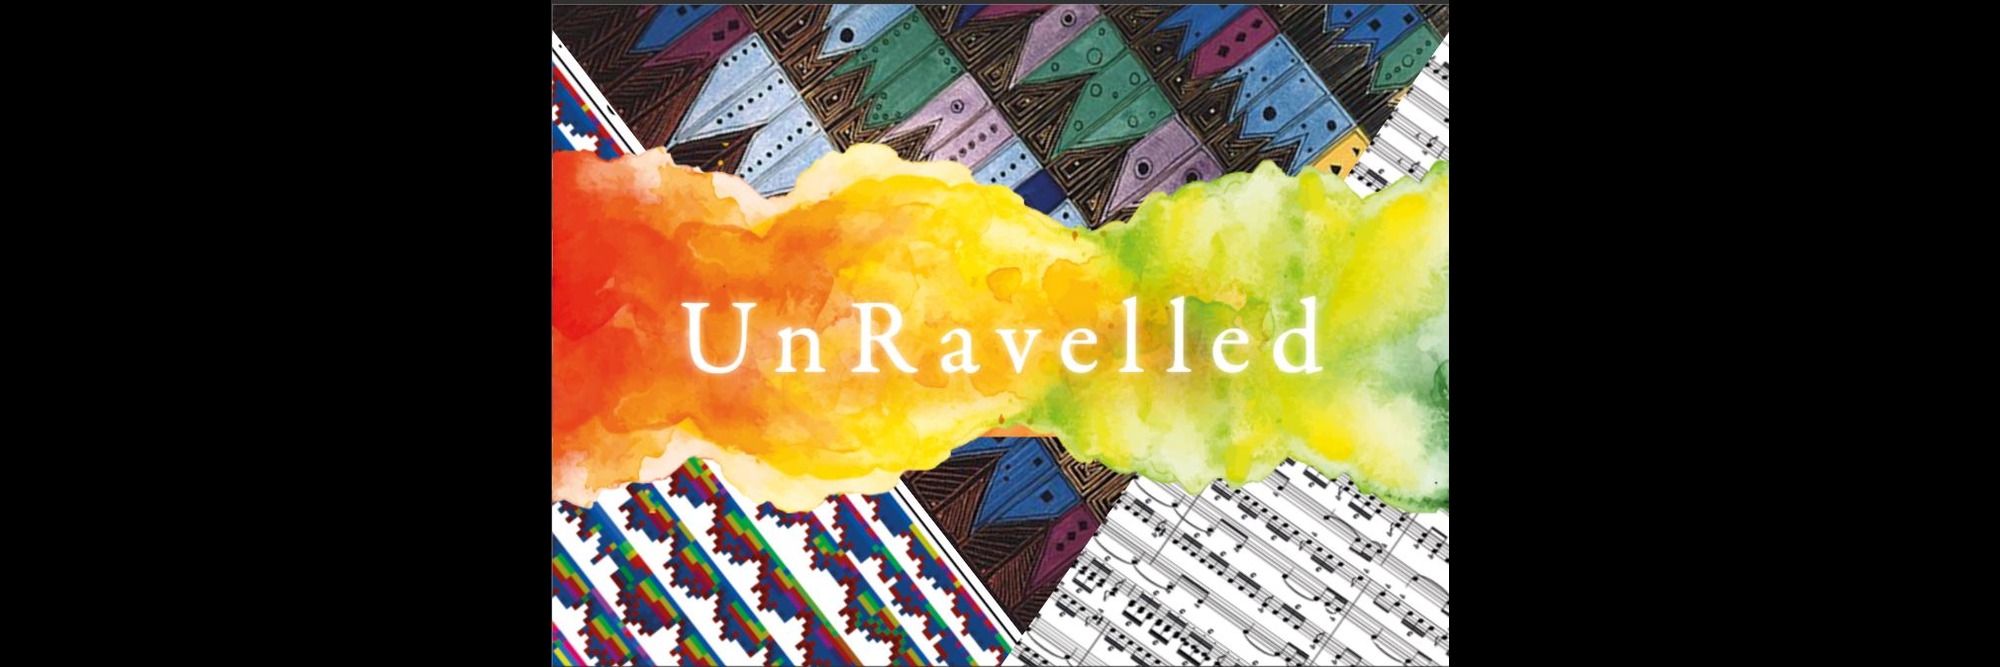 UnRavelled Event